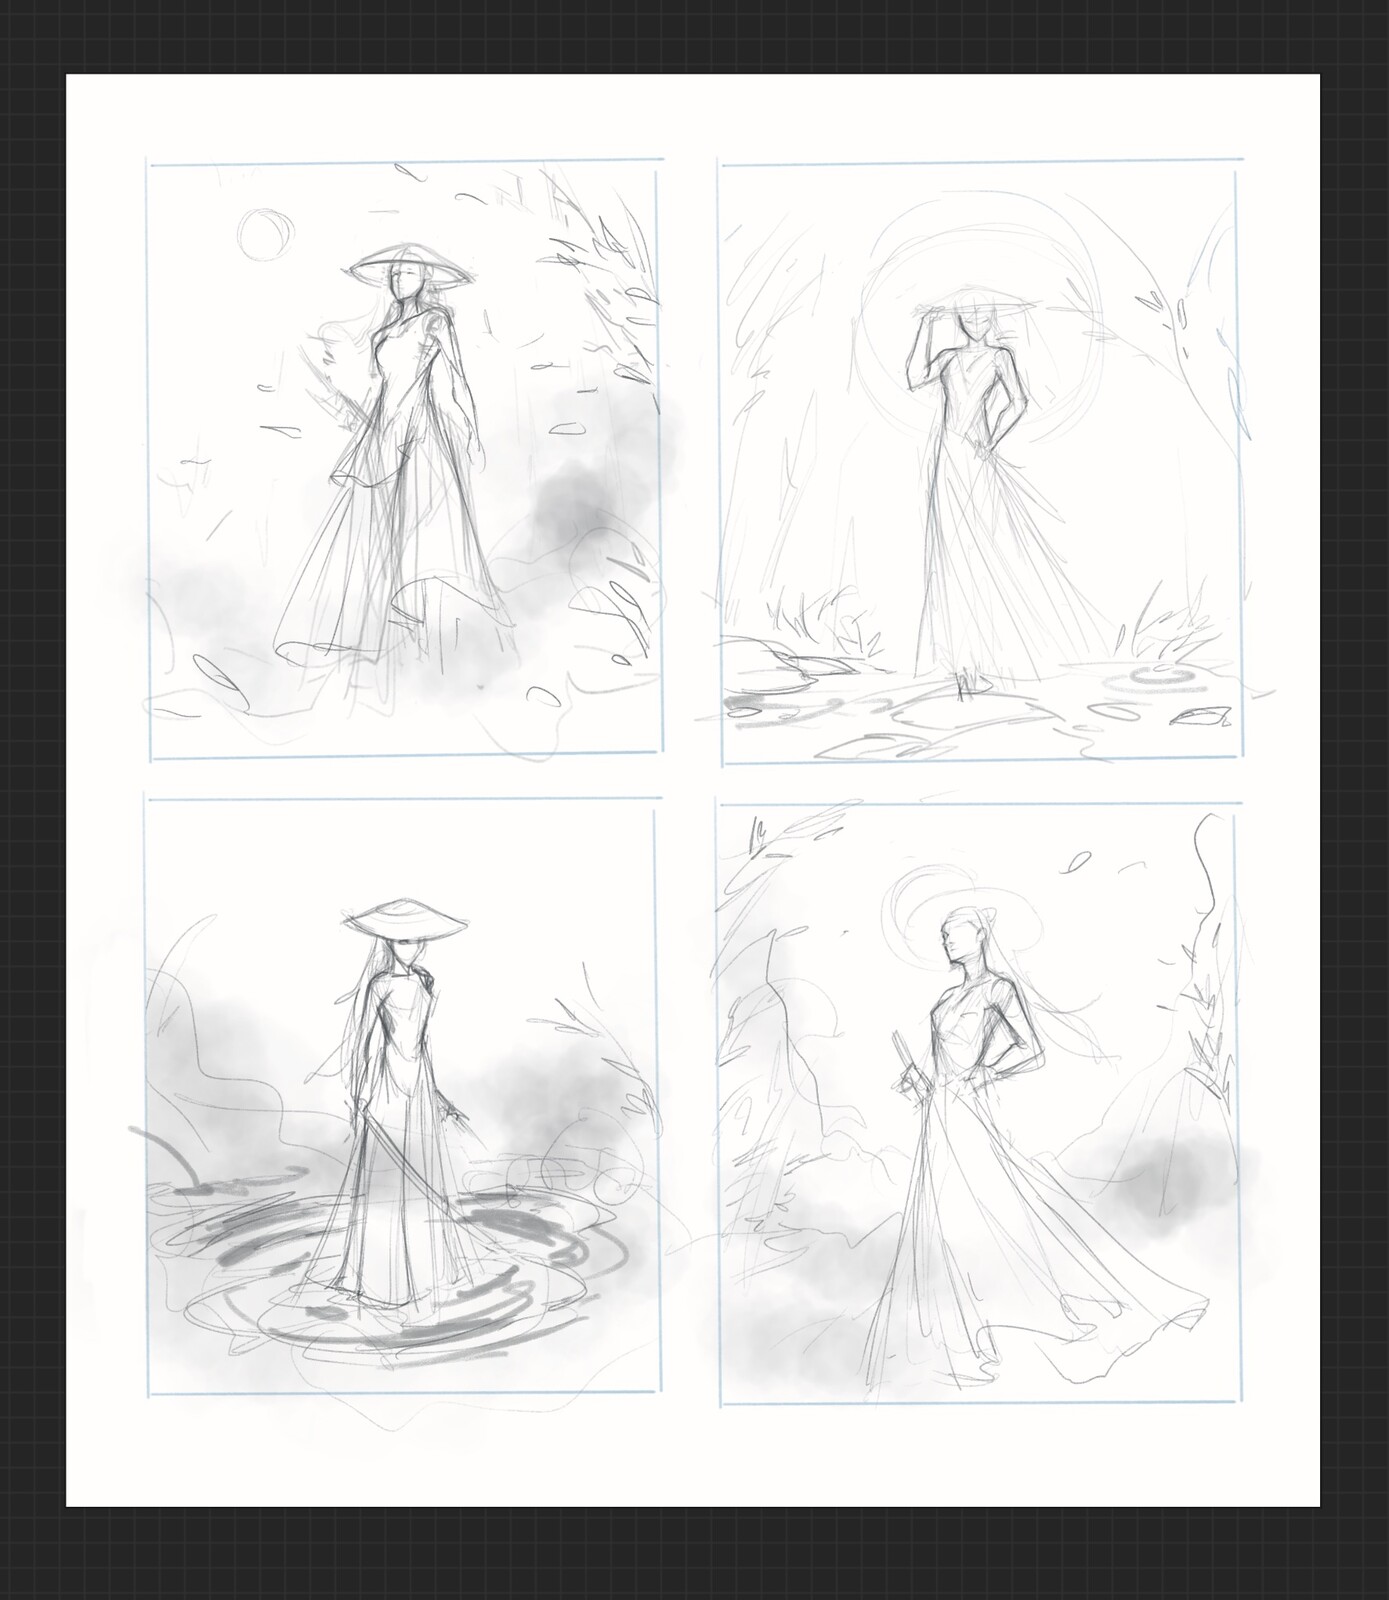 Thumbnail sketches! The client liked the top left the most.